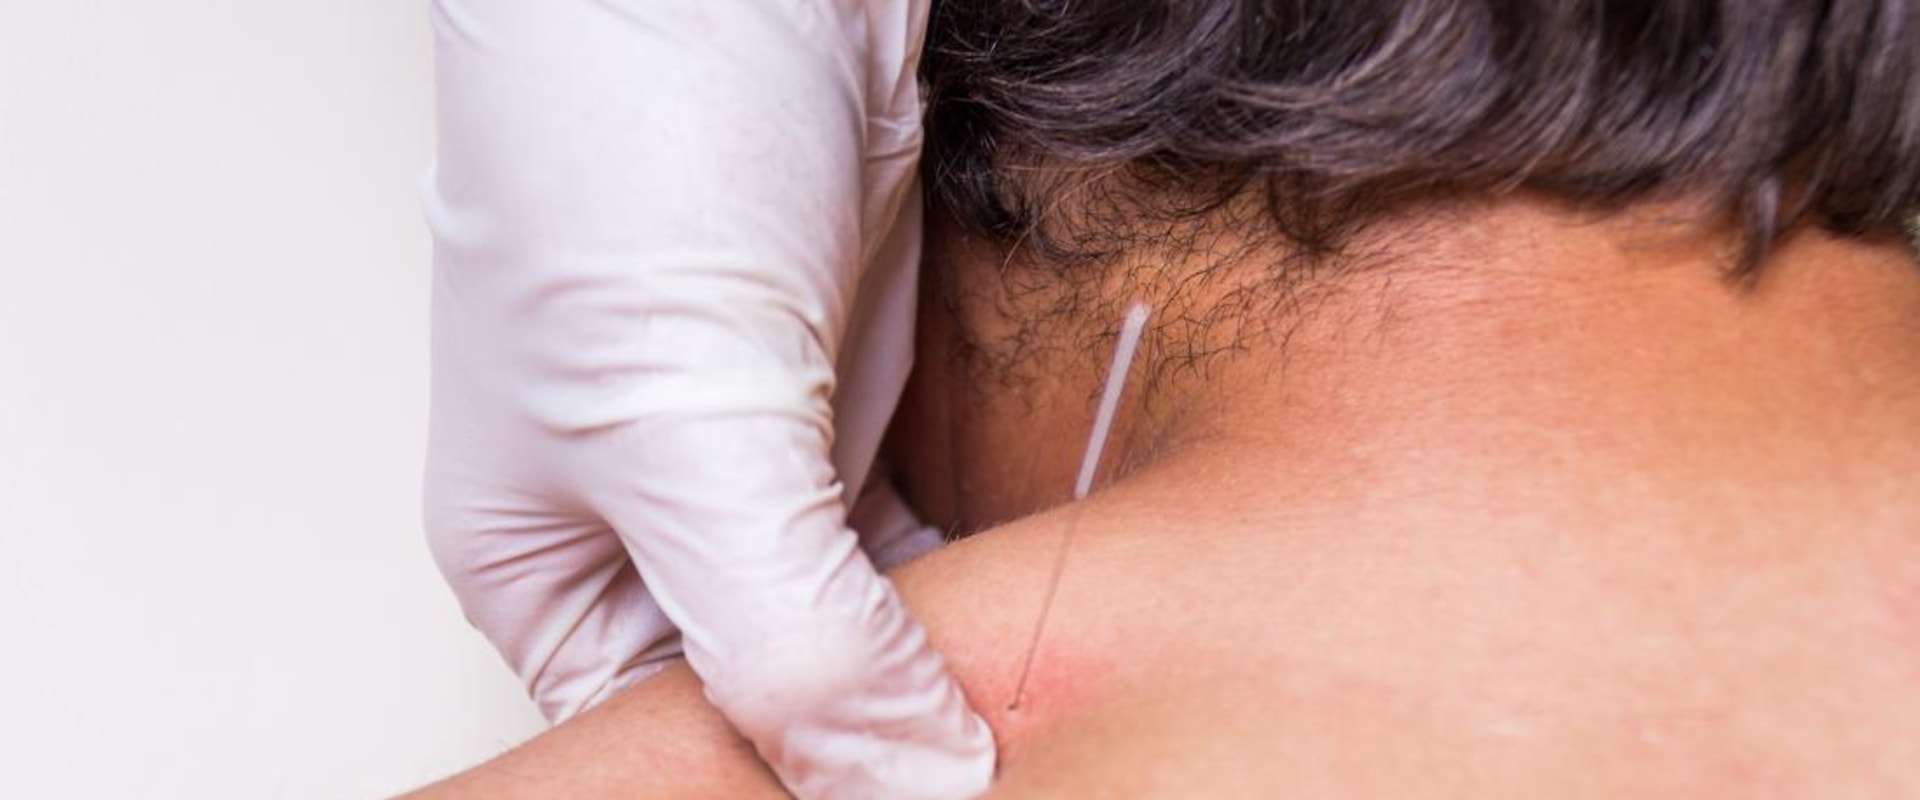 Acupuncture vs Dry Needling: What's the Difference?